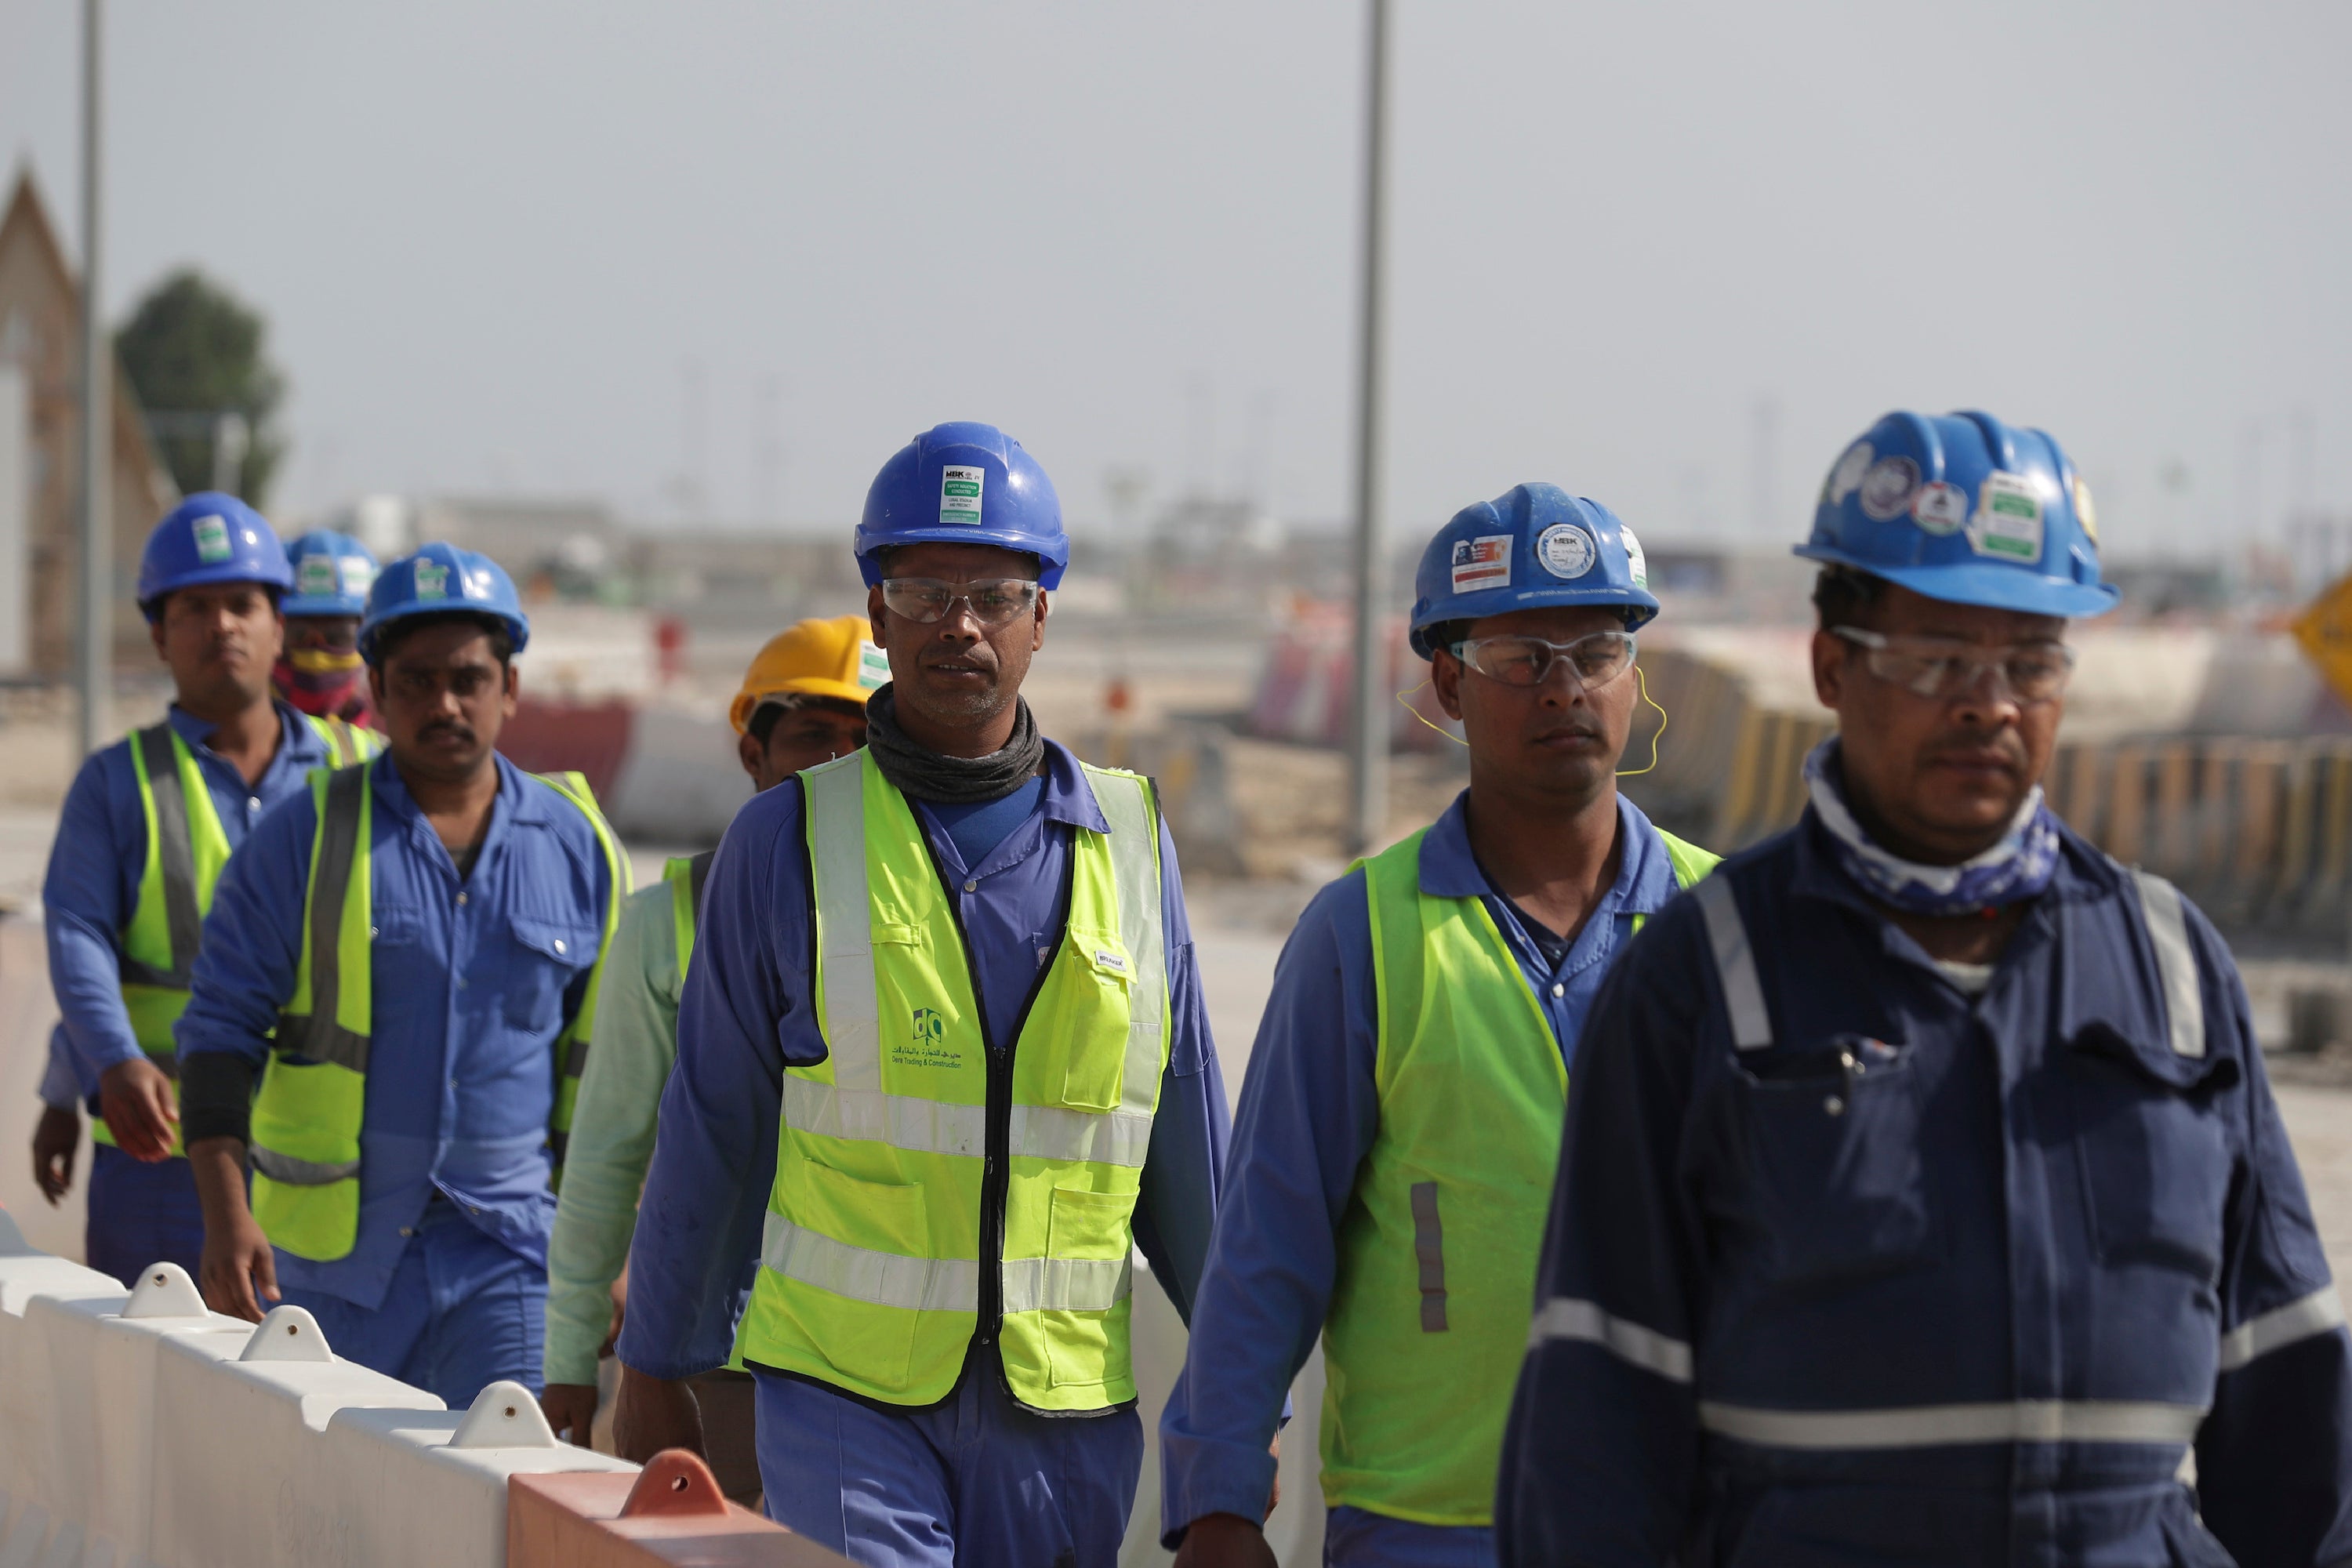 Workers walk to the Lusail Stadium, one of the 2022 World Cup stadiums, in Lusail, Qatar.